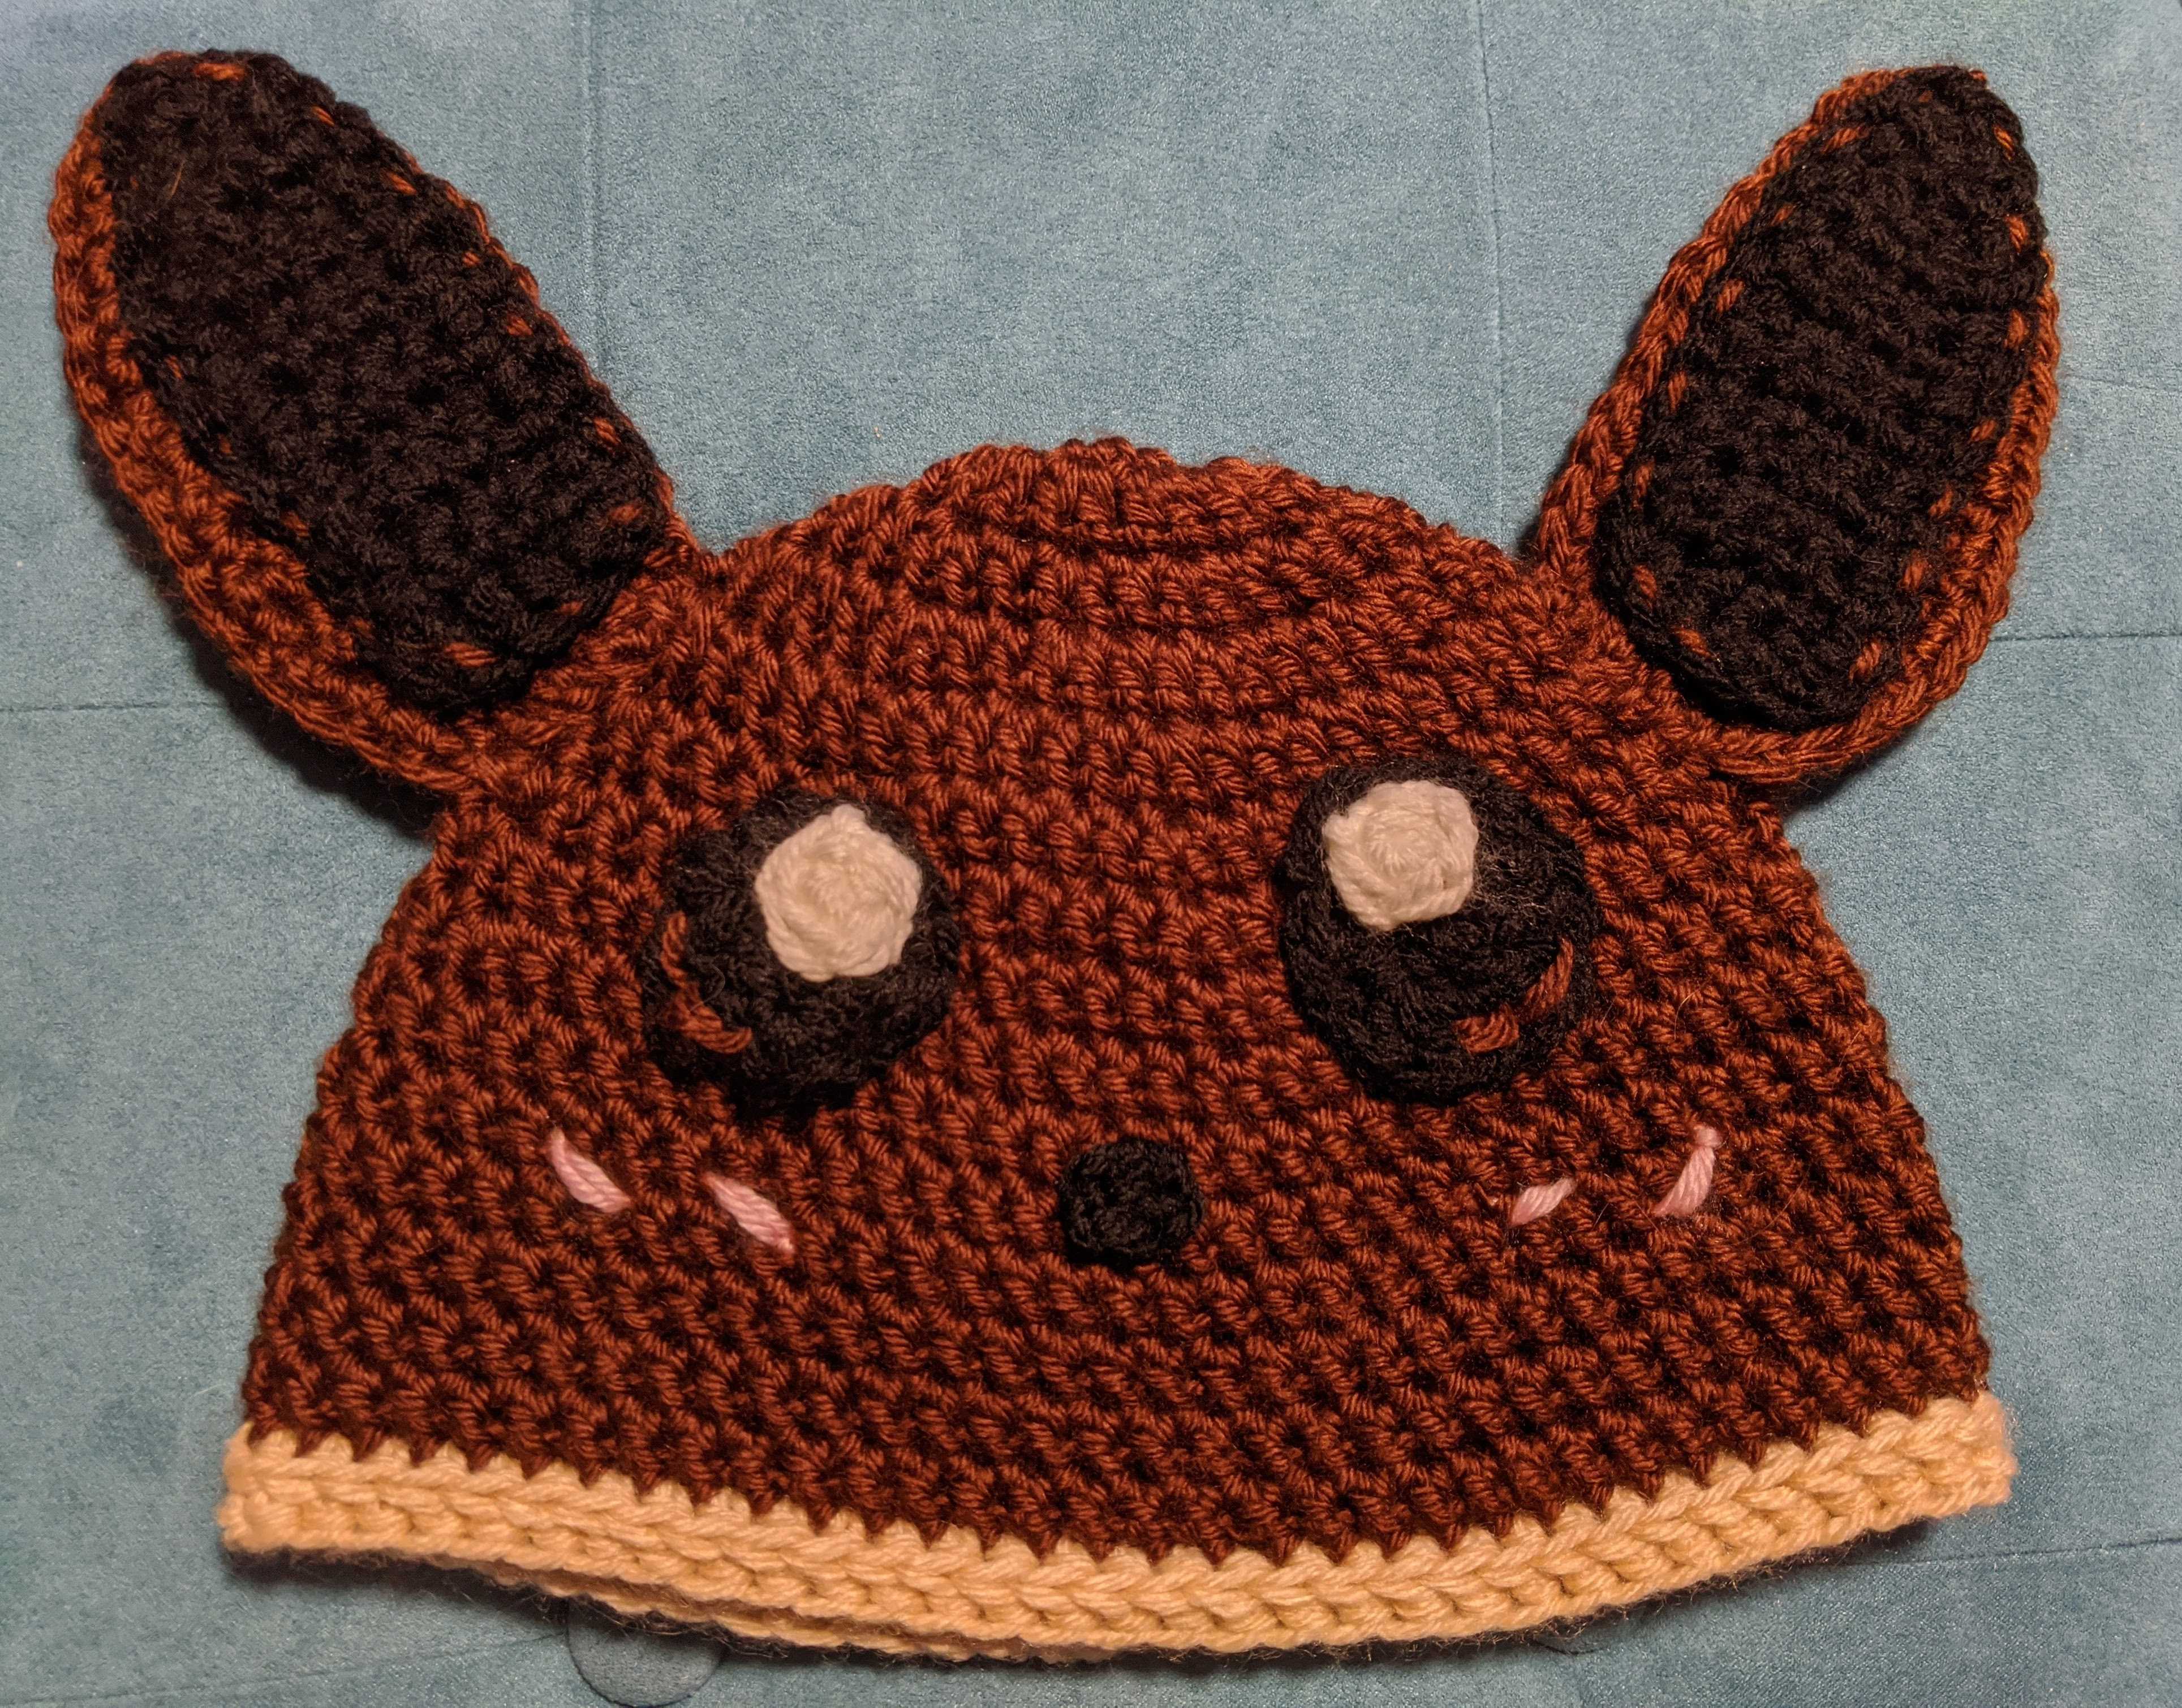 I modified a beanie pattern. It came out surprisingly cute?!